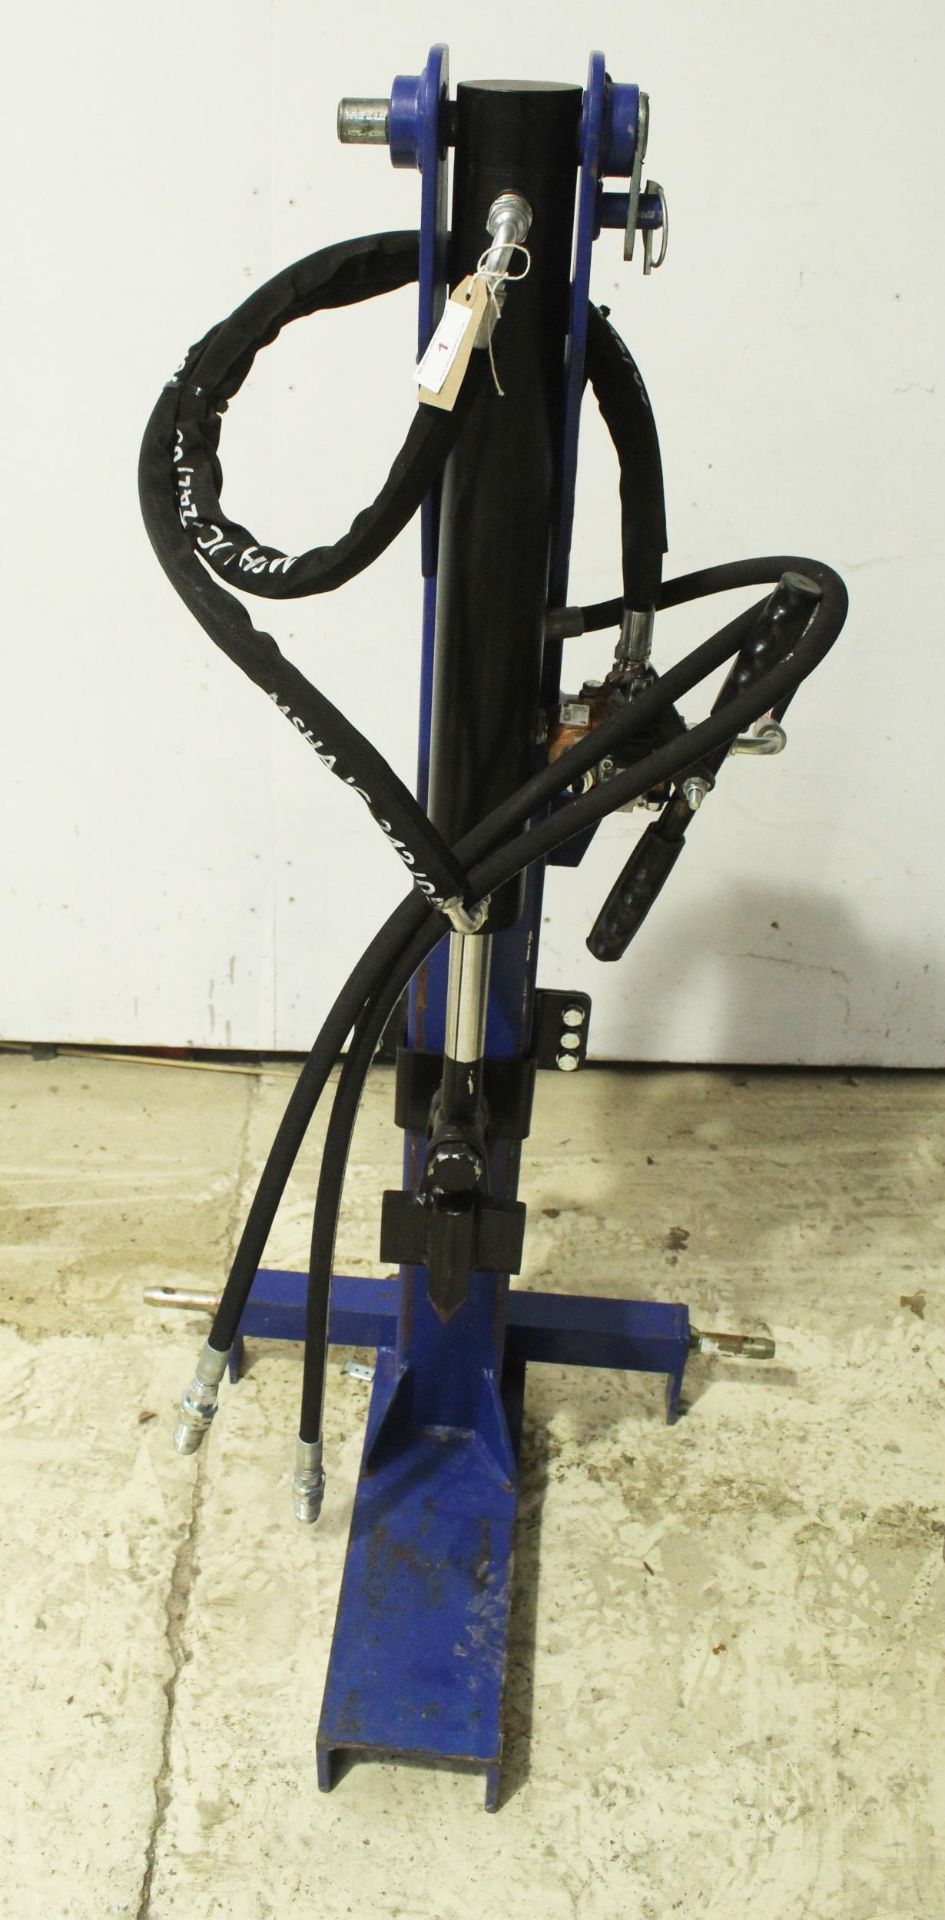 3 POINT LINKAGE HYDRAULIC LOG SPLITTER MSHA IC-242/05 IN GOOD WORKING ORDER NO VAT - Image 3 of 3